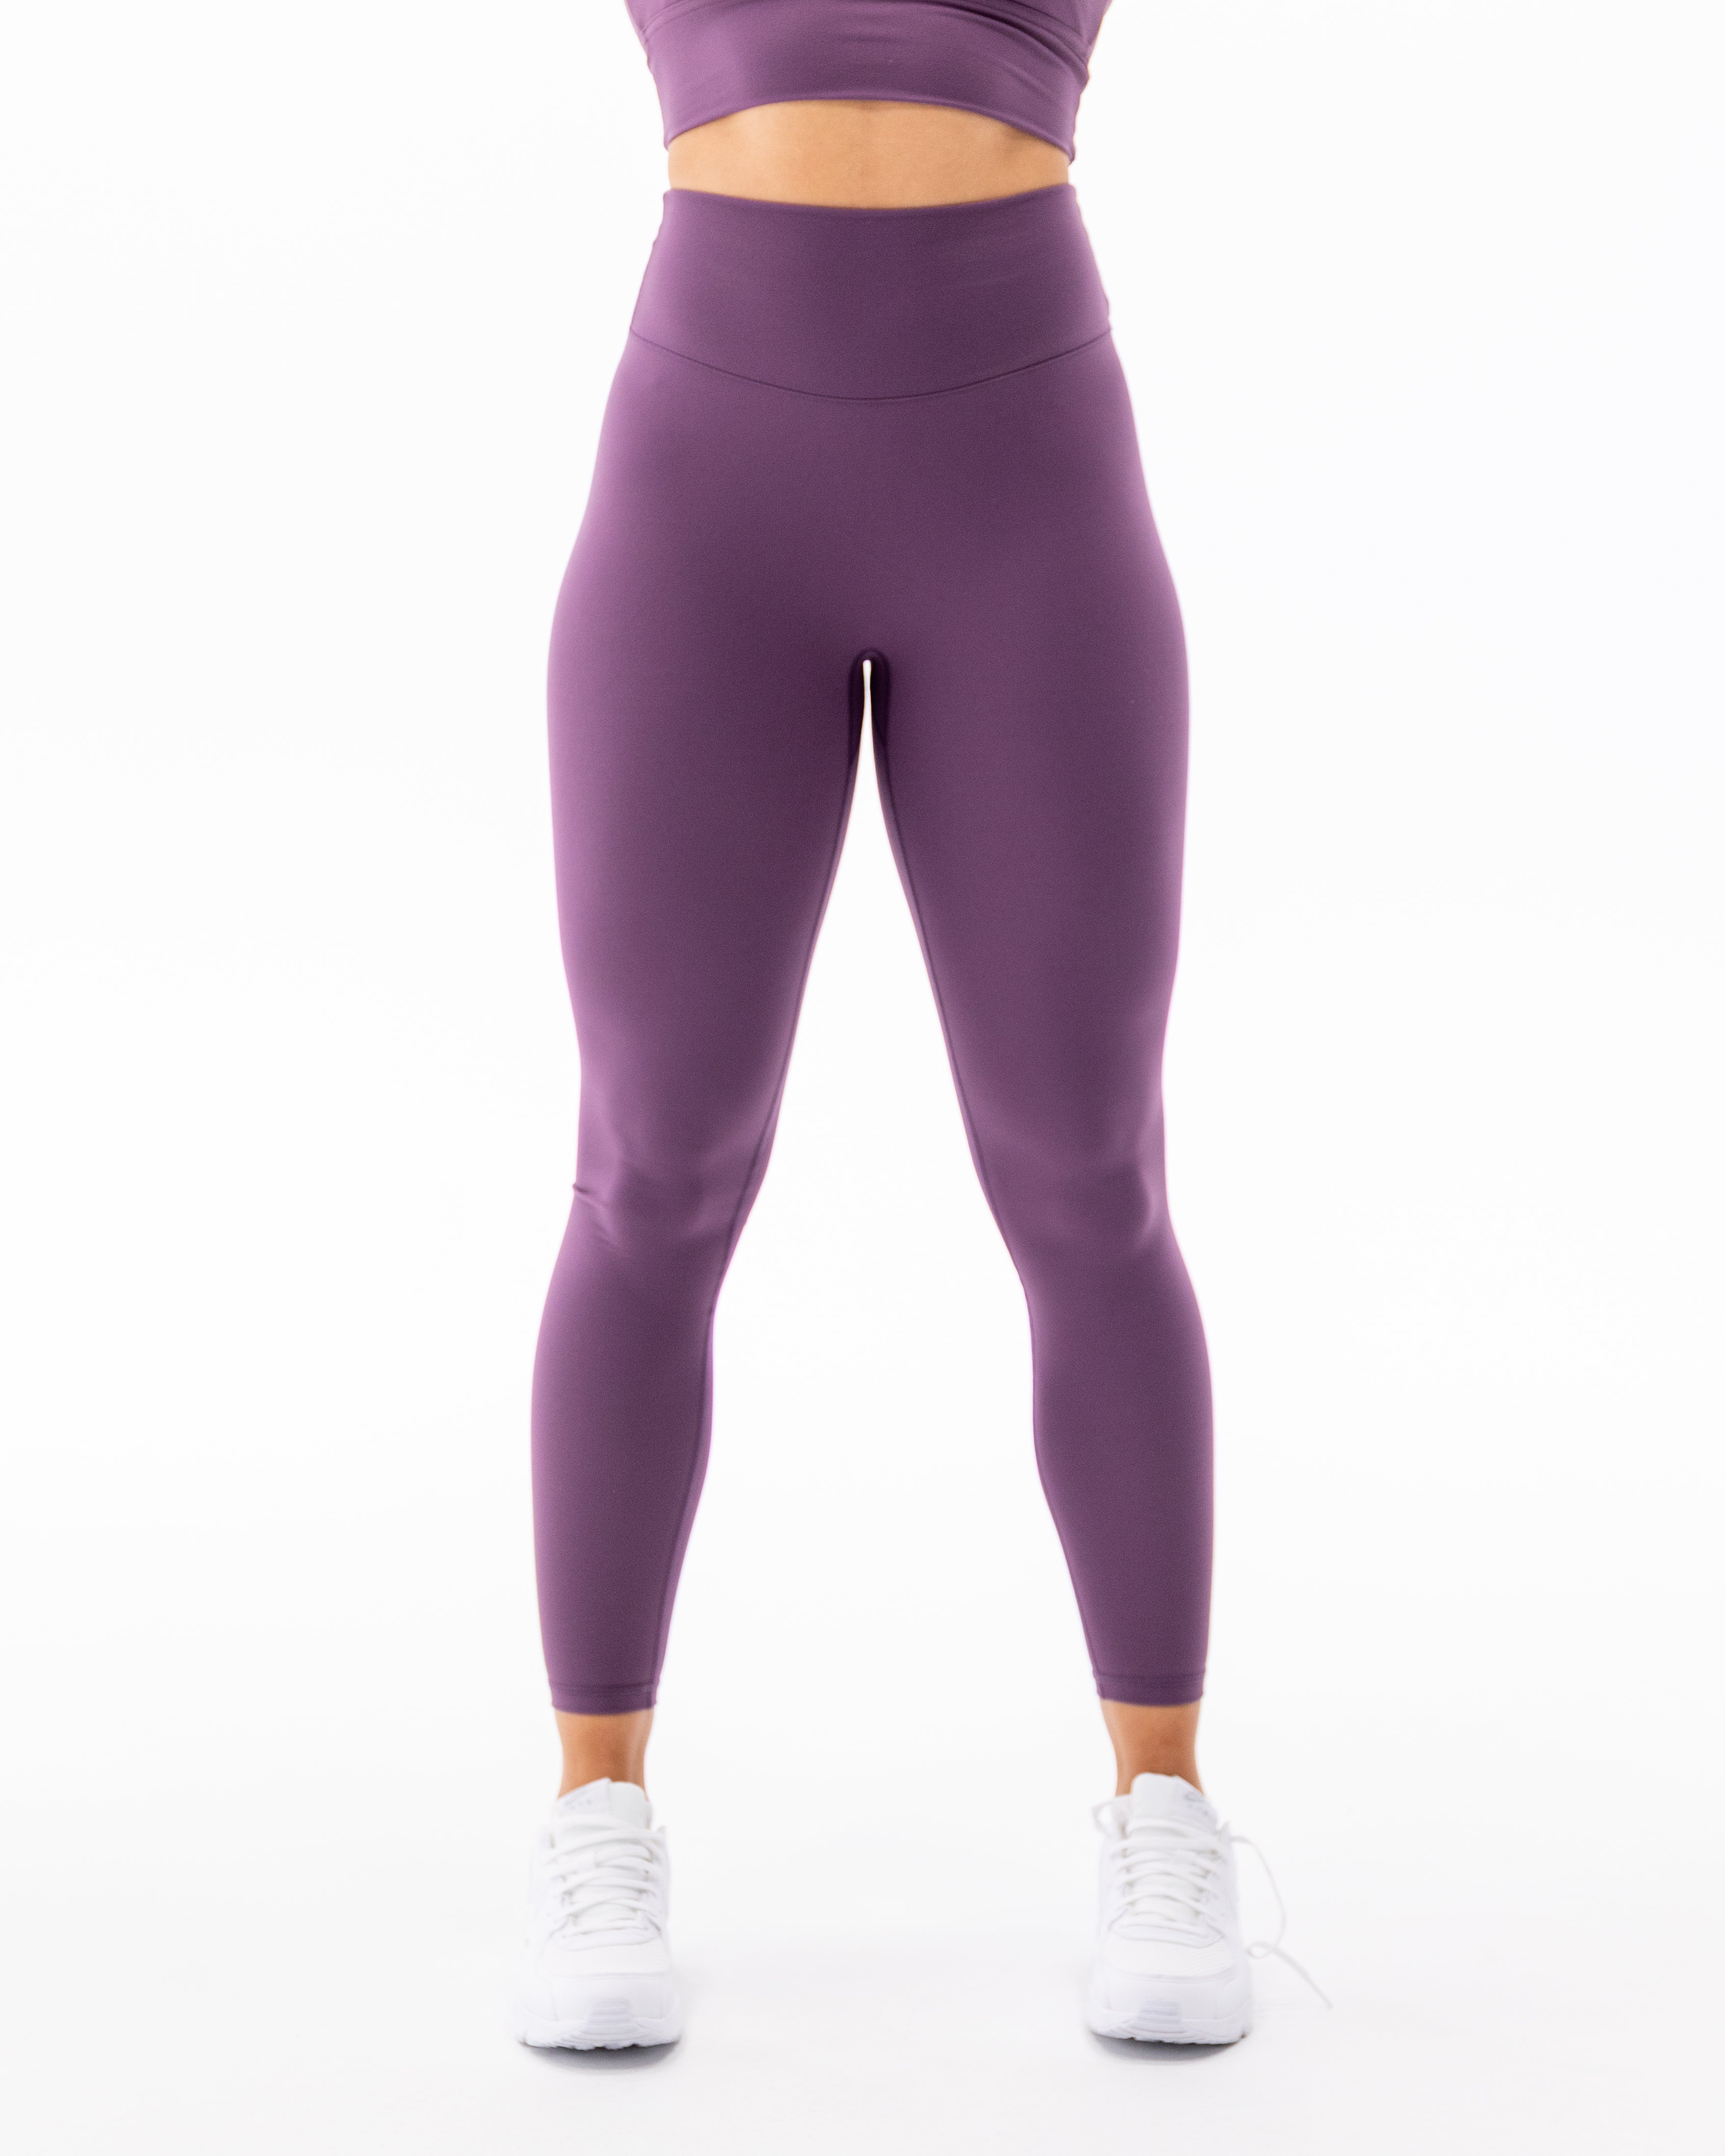 P'tula - Discover our new Alainah III Sleek Legging - now part of our High  Performance Collection! • Booty flattering • Heat sensitive (adheres well  as you workout) • Tummy-smoothing high rise •